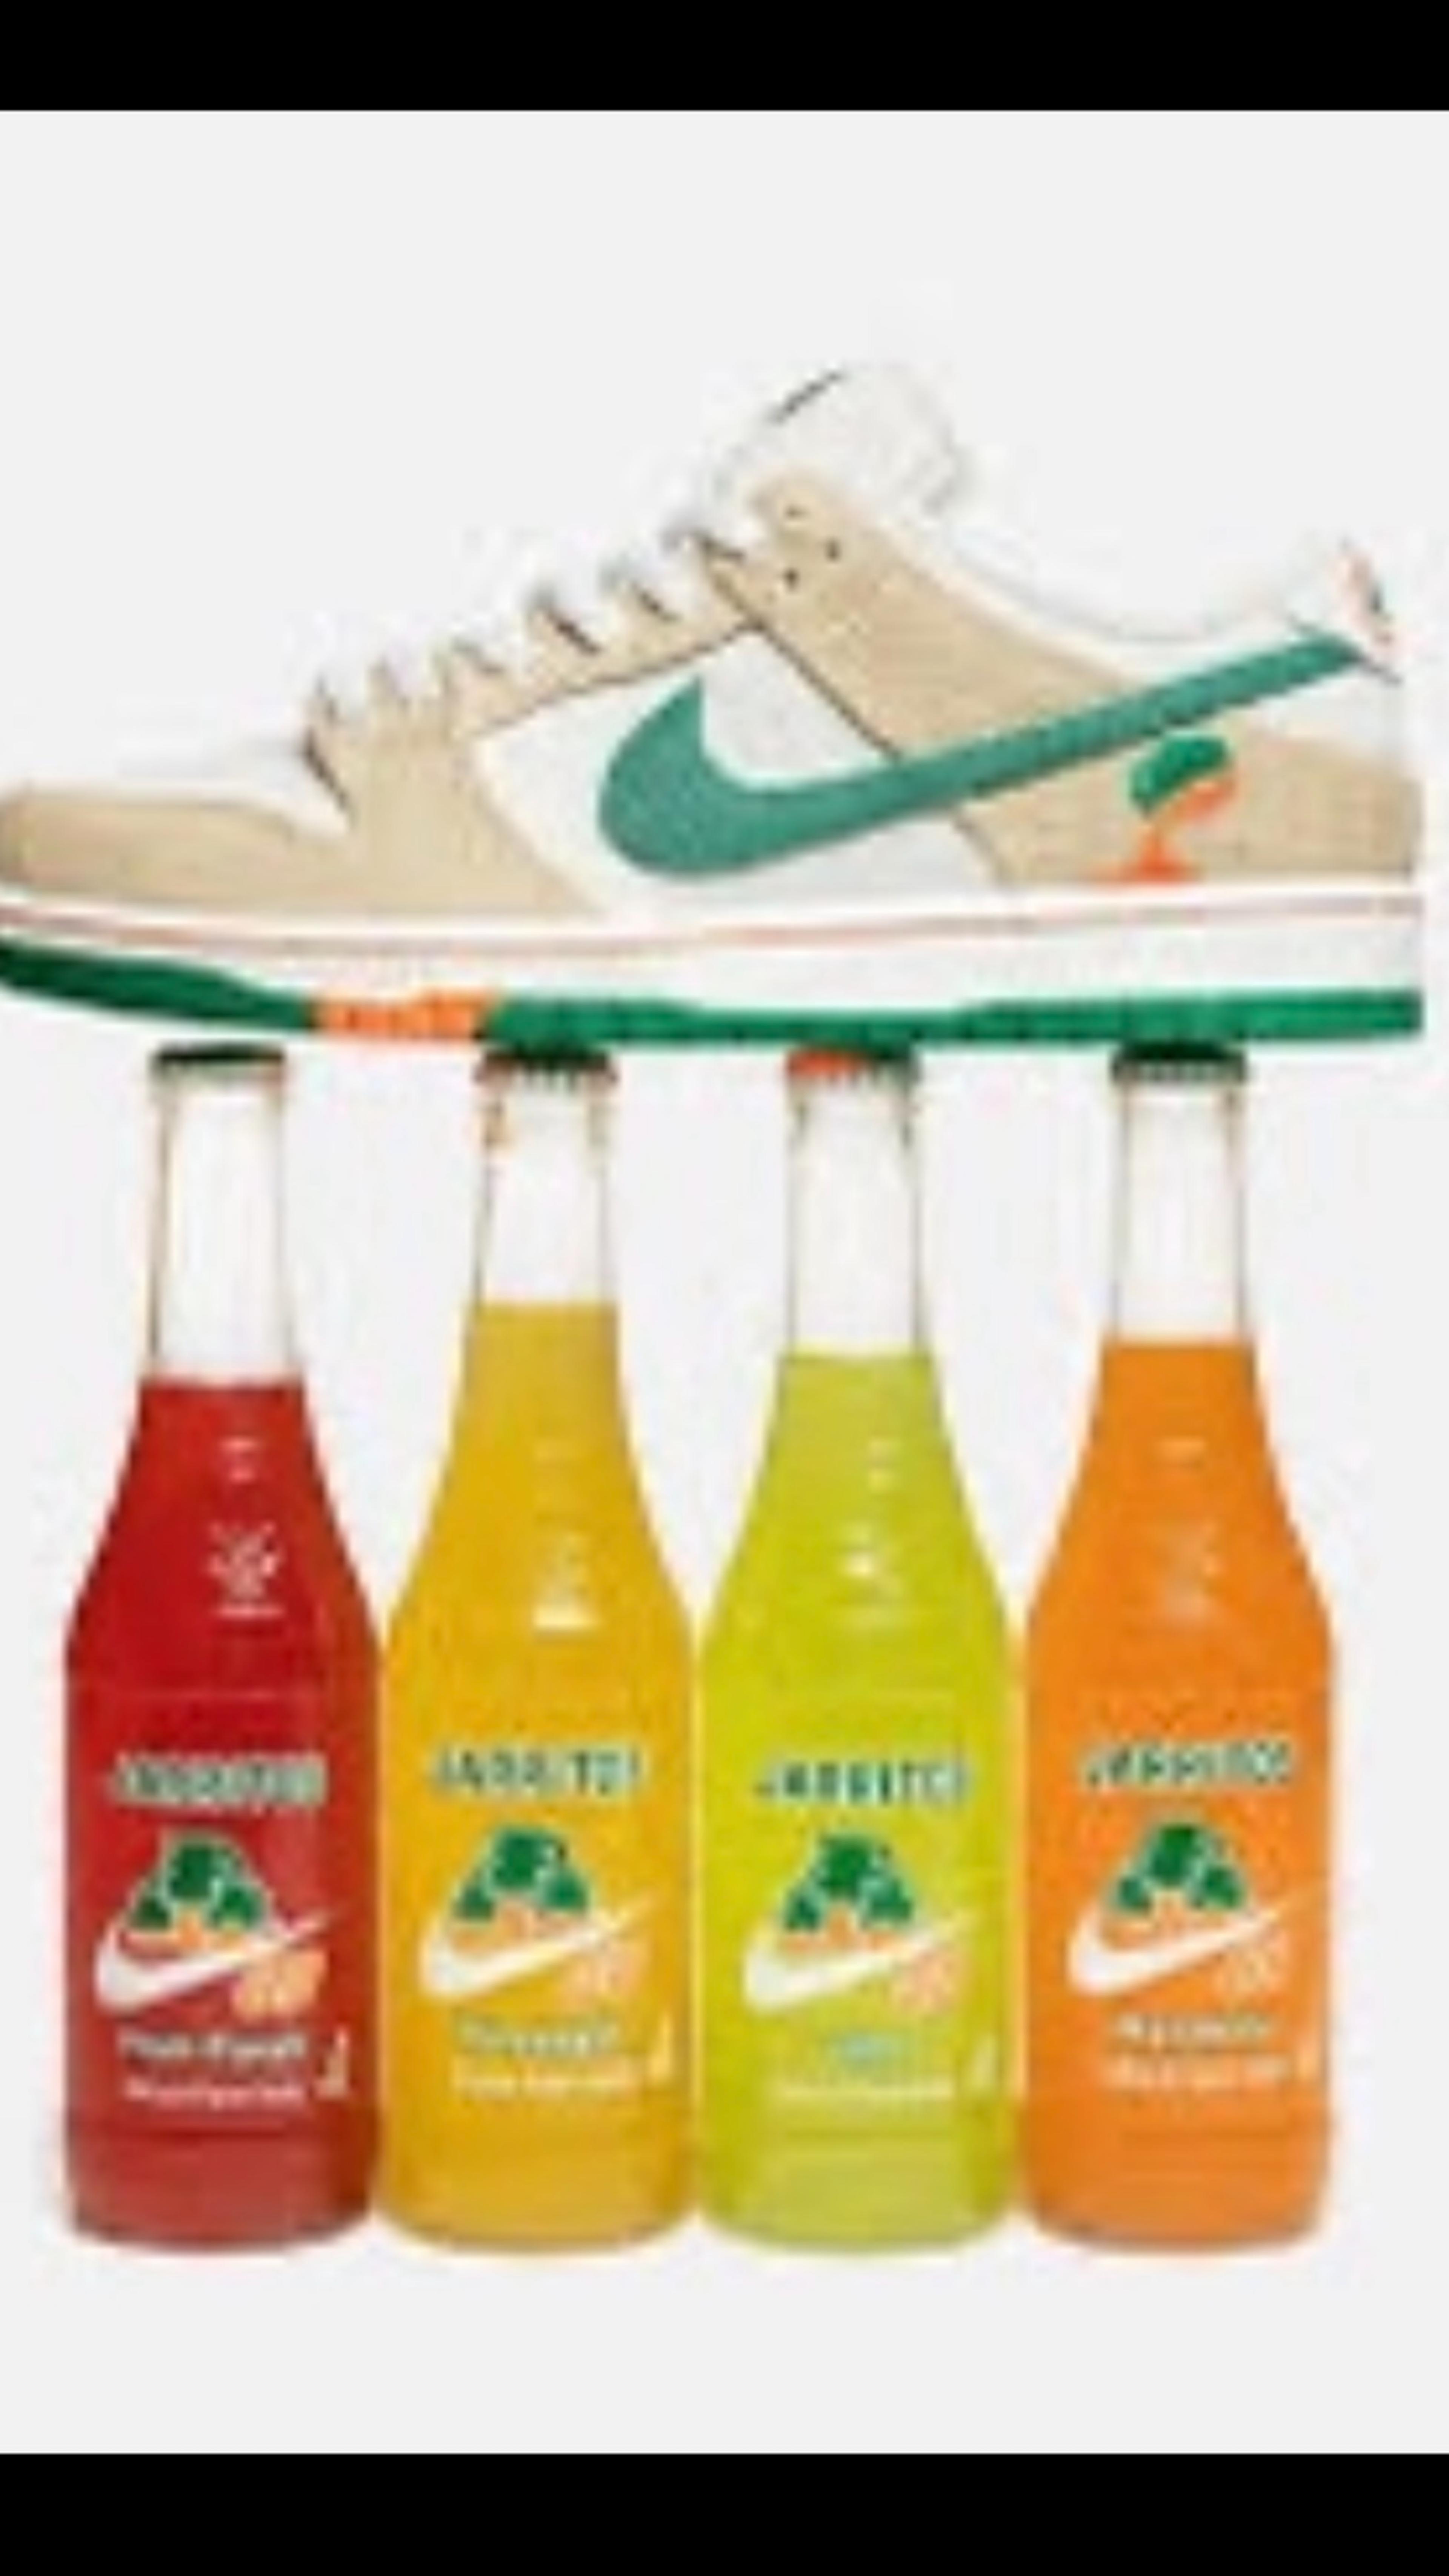 Preview image for the show titled "Mys Whl J4 SB PINE GREEN OR JARRITOS up to 11 & 2 SHOES & INSTAS" at Tomorrow @ 12:10 AM